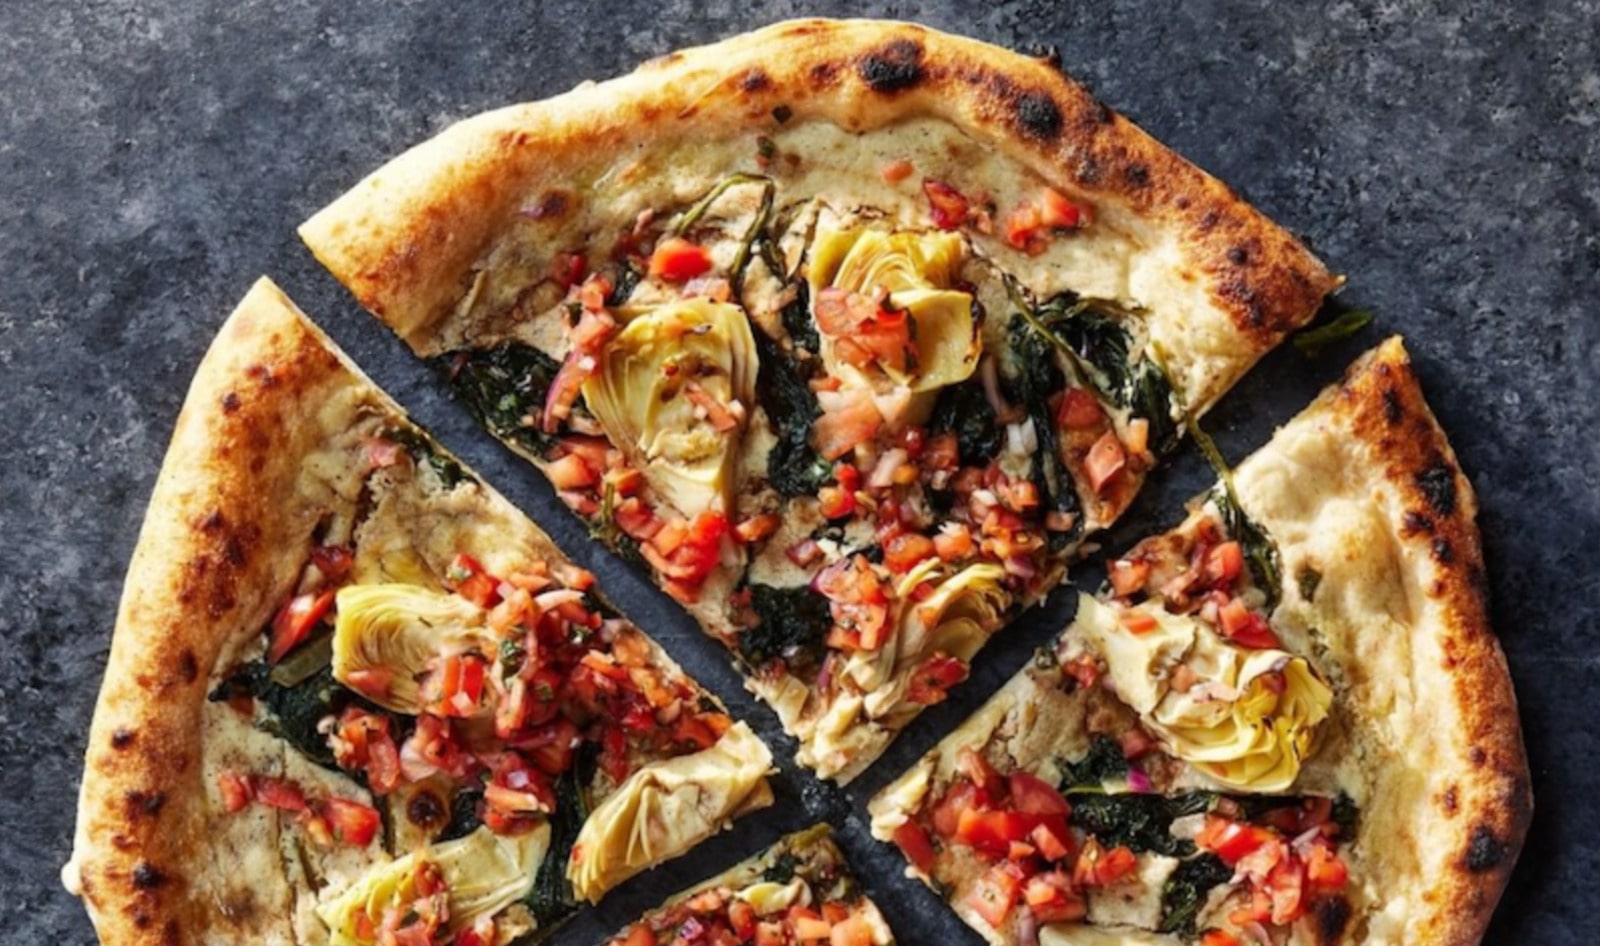 Vegan Food Near Me: From Detroit to New York-Style, 10 Vegan Pizzas You Have to Try